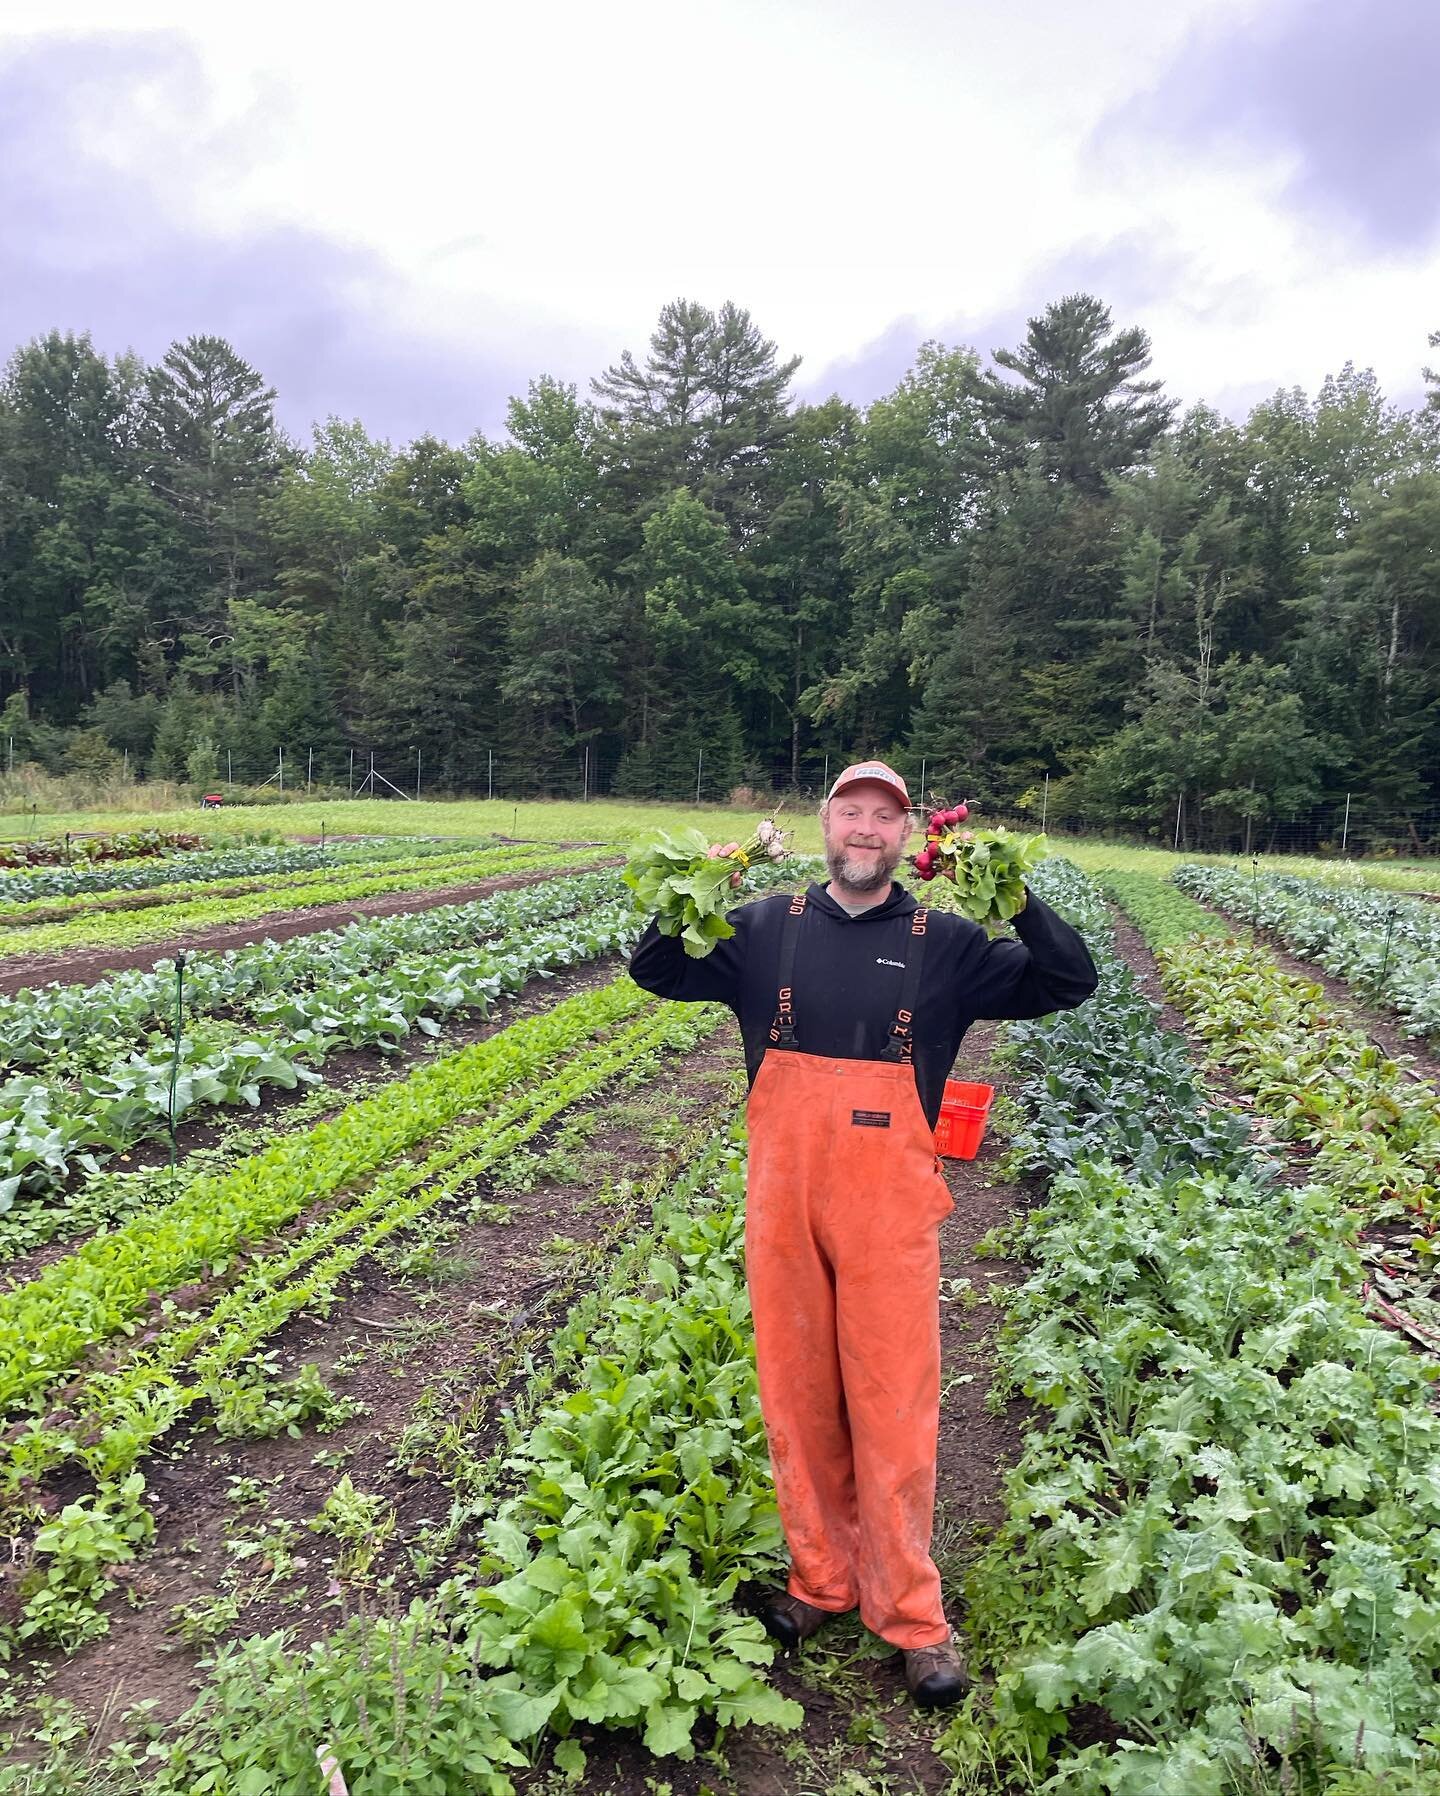 A rainy harvest day with lots of nice crops coming in&mdash;collards and Hakurei turnips are back! And red radishes are on sale, 2 bunches for $5. Produce is peaking now, with all of the summer fruits still here, and more fall crops joining the mix e